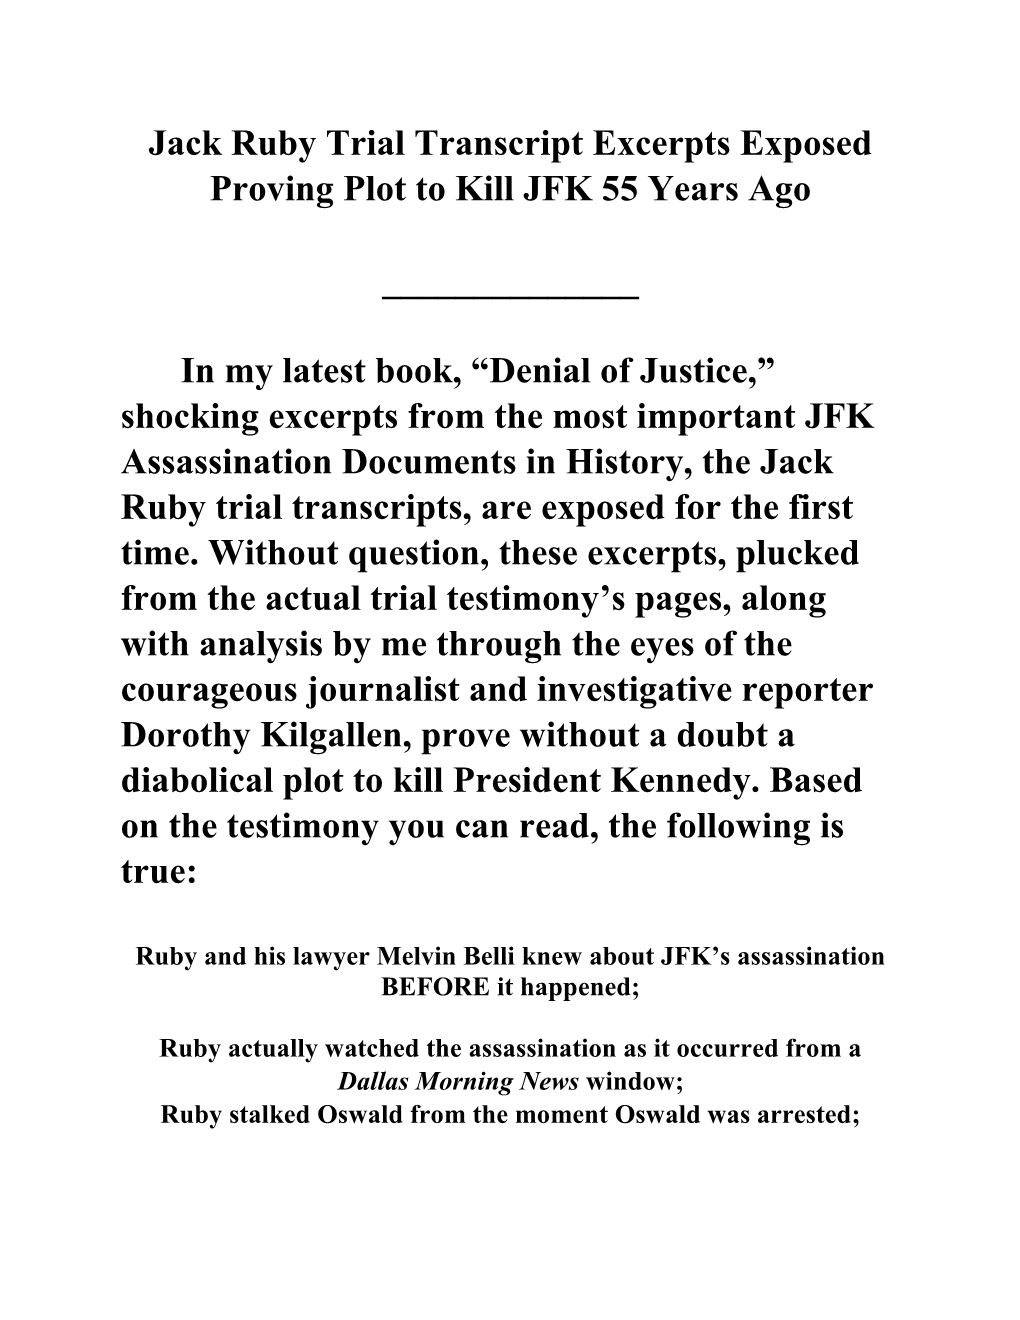 Jack Ruby Trial Transcript Excerpts Exposed Proving Plot to Kill JFK 55 Years Ago